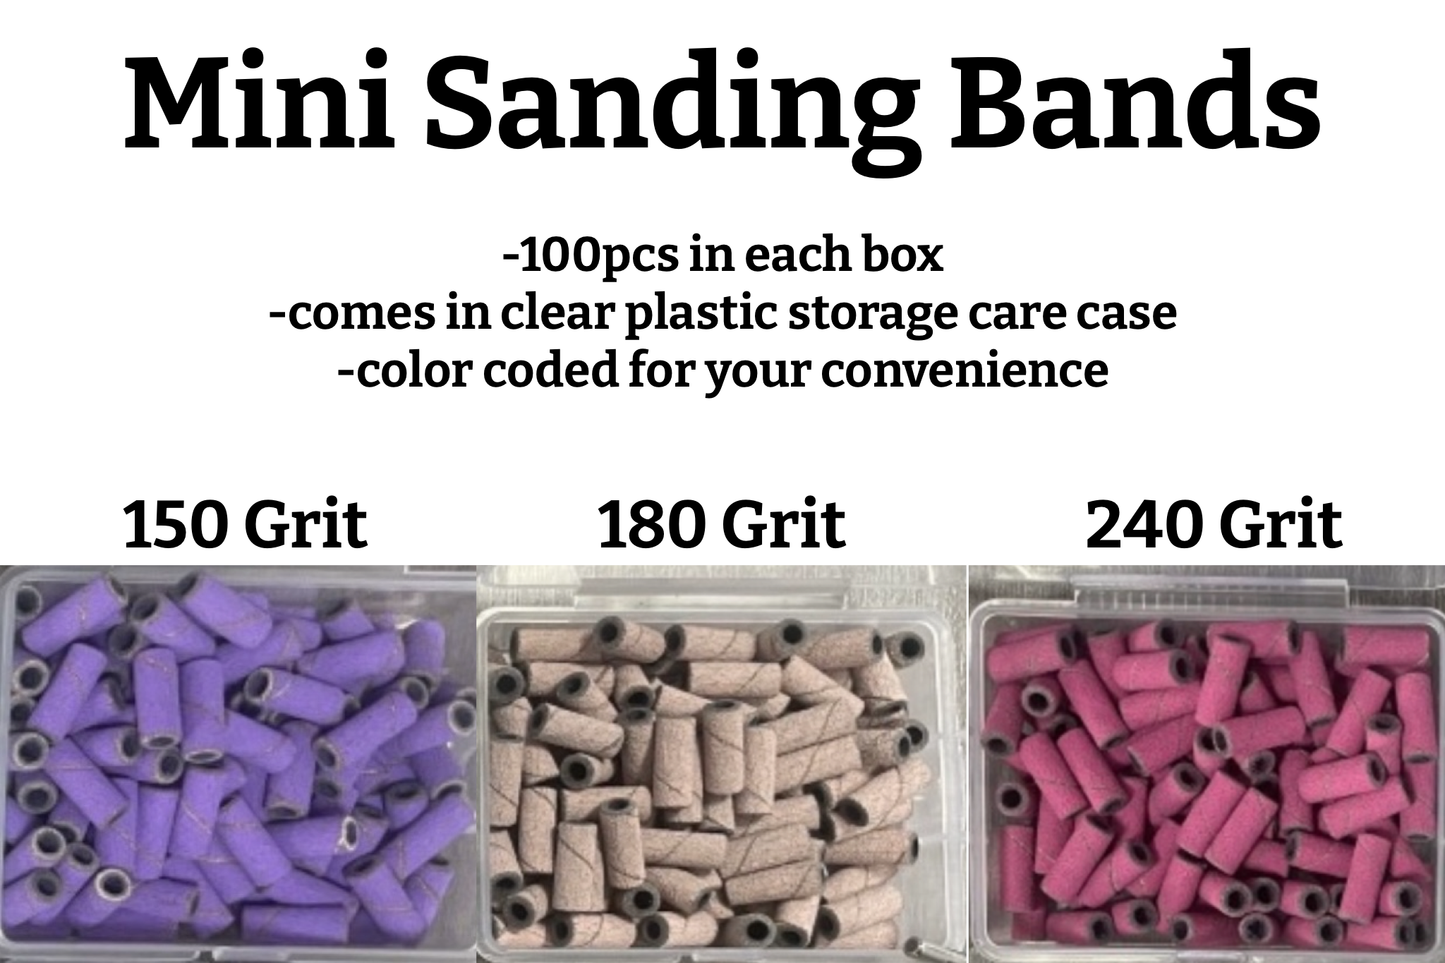 Absolute Mini Sanding Bands